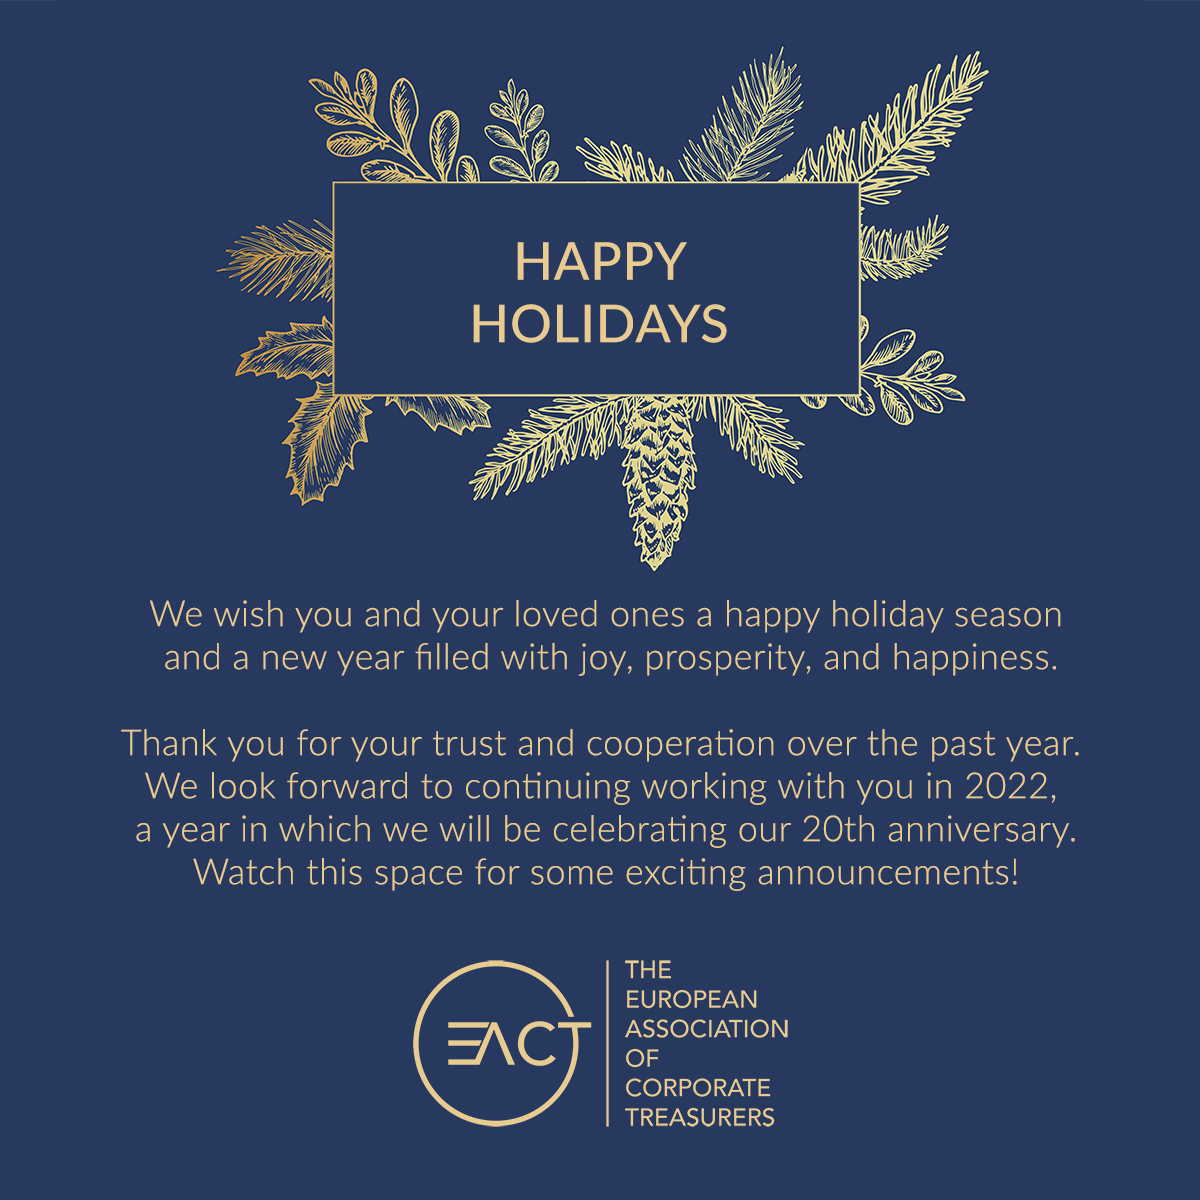 Happy holidays from the EACT!